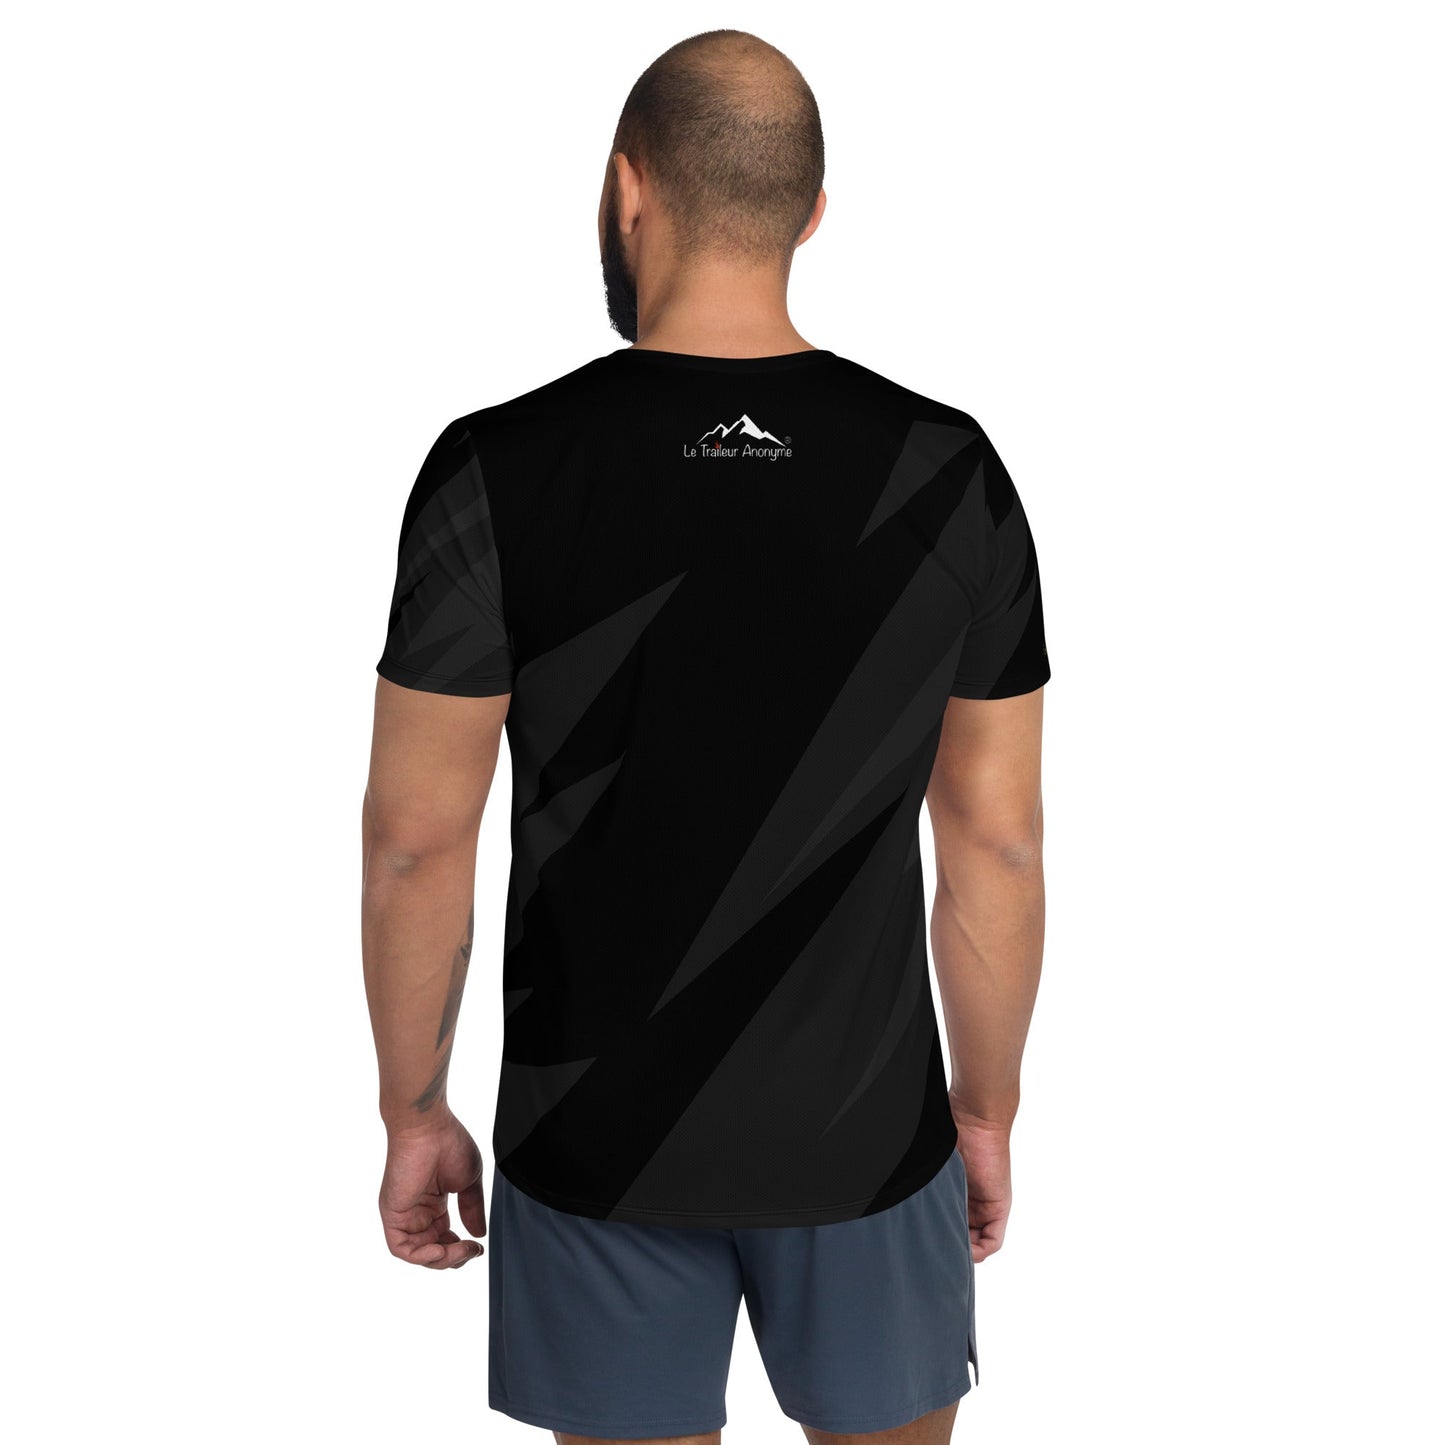 T-Shirt Running - Homme - Collection Rock - Let's Rock'n Run - Le Traileur Anonyme